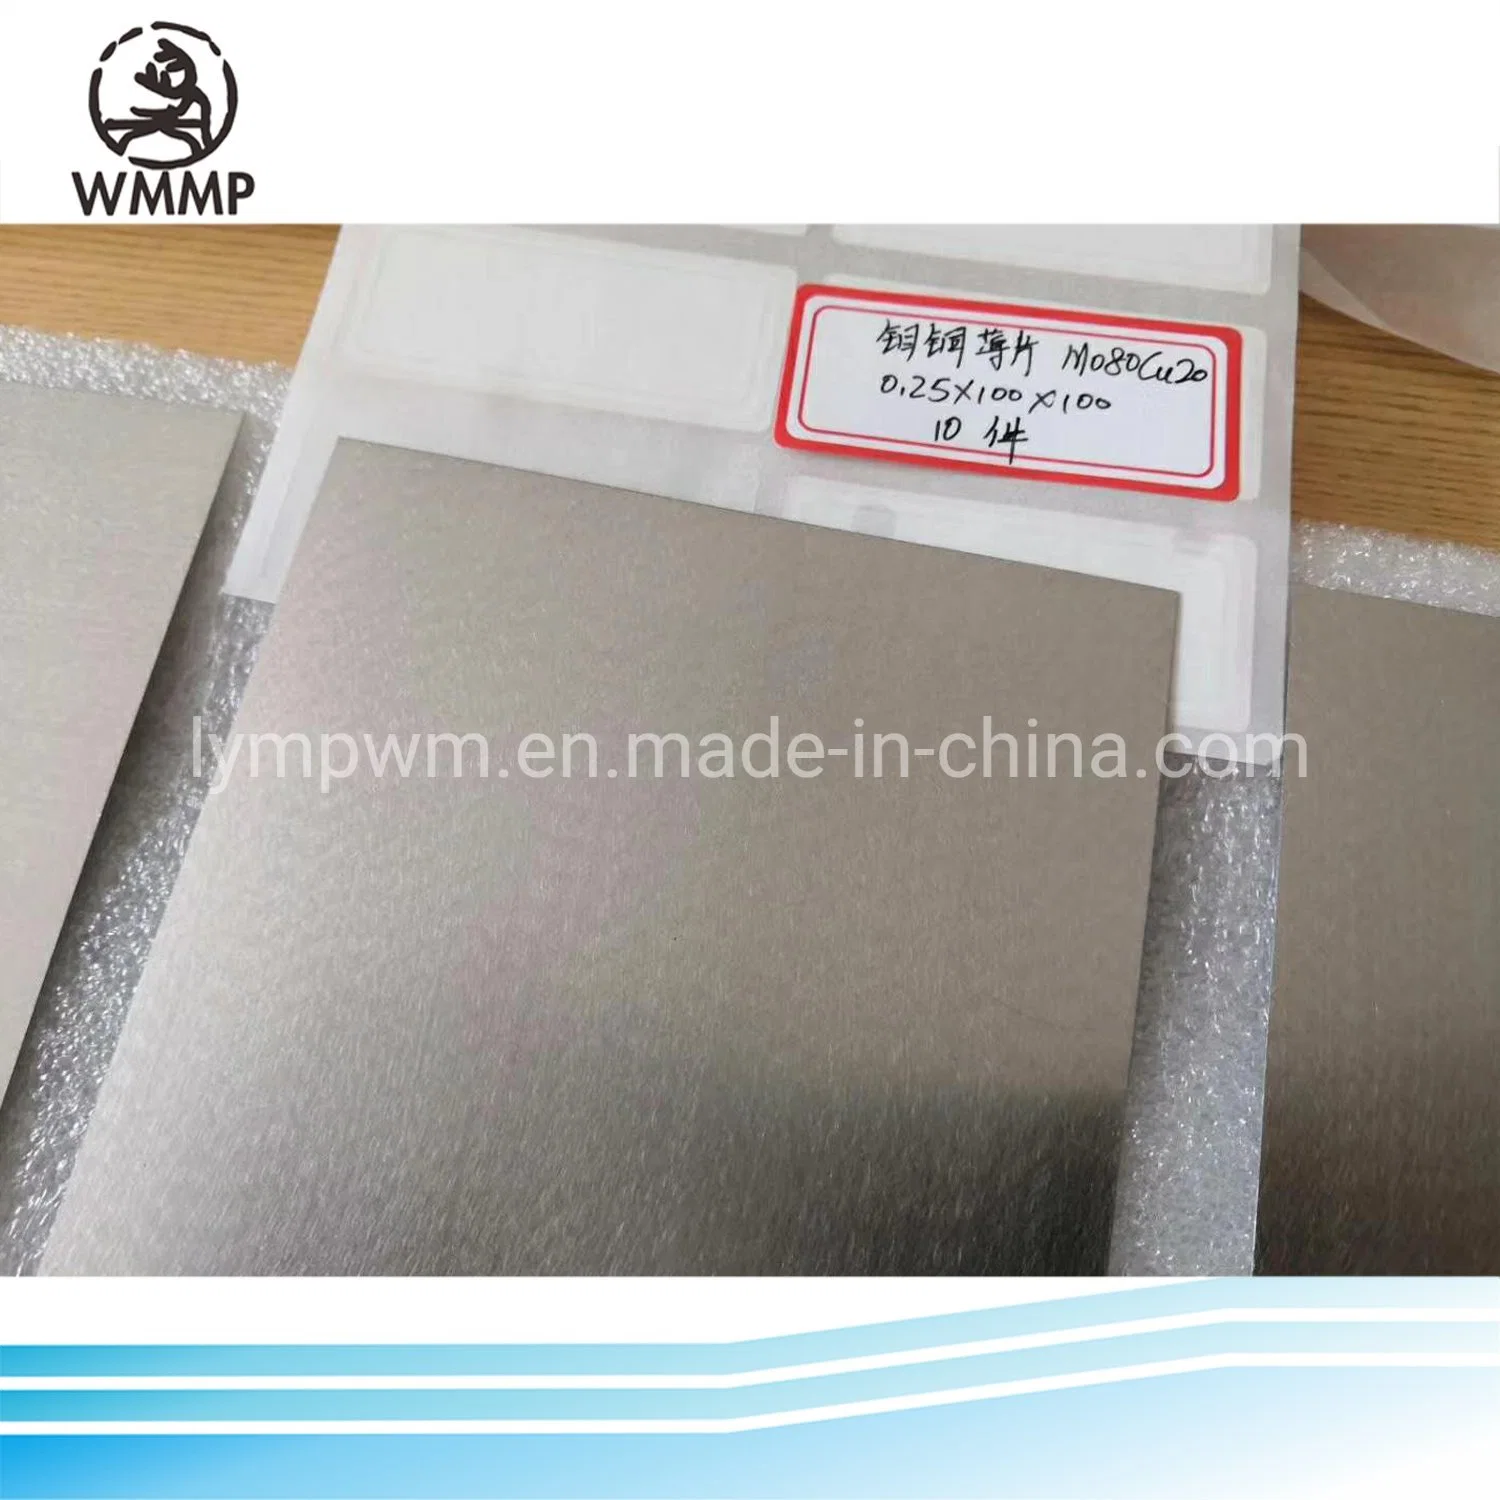 Molybdenum Copper Alloy Mo80cu20 Thickness 0.25mm Thin Sheet Molybdenum Alloy